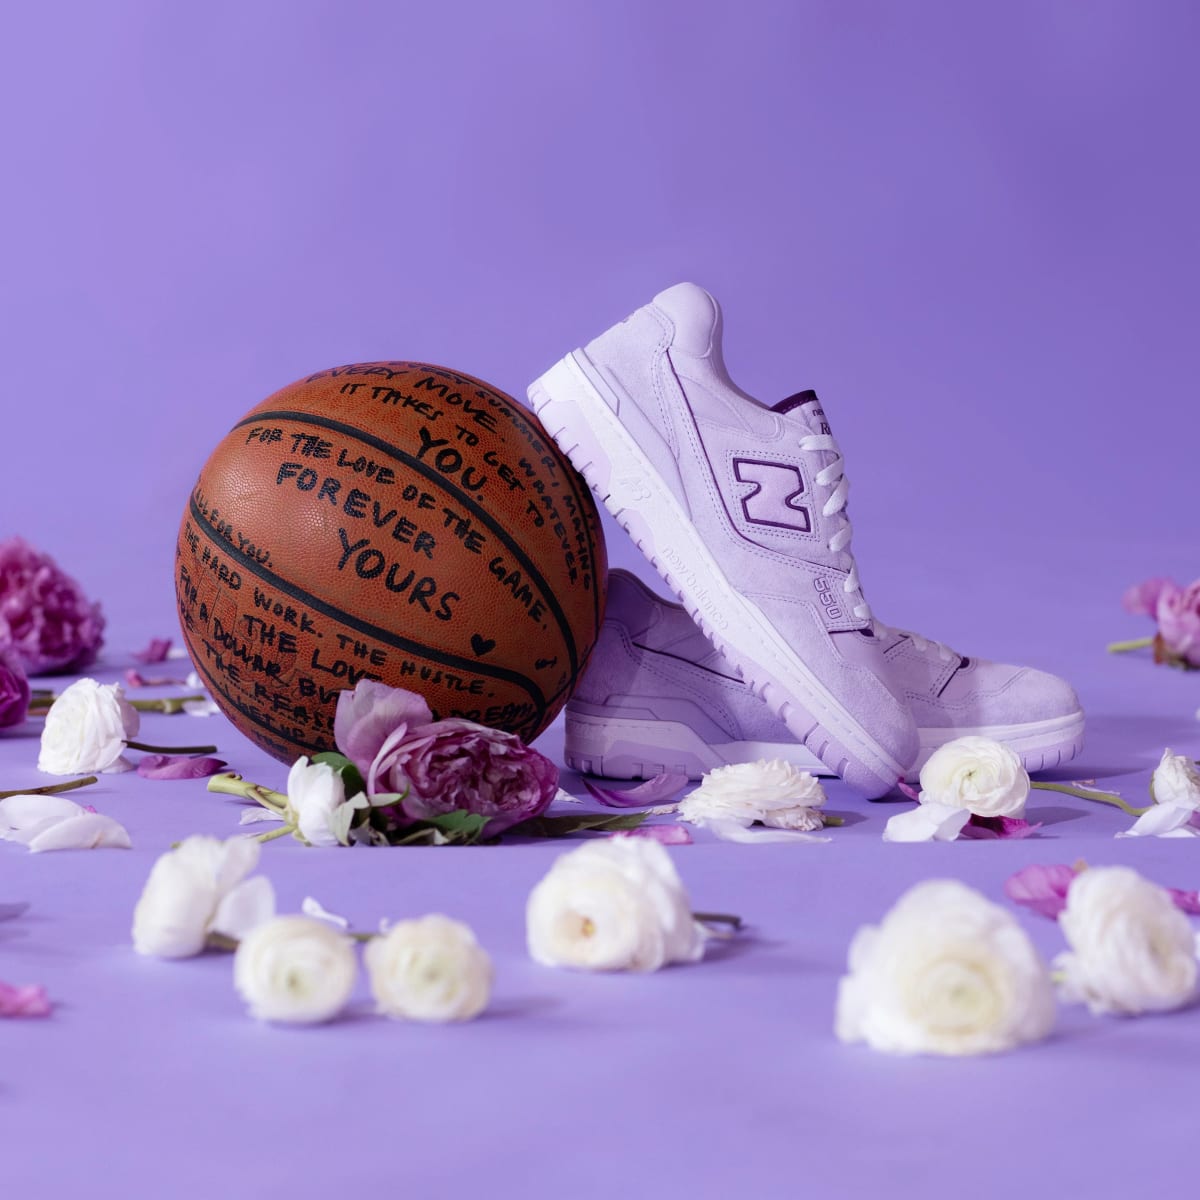 Rich Paul x New Balance 'Forever Yours' Release Information